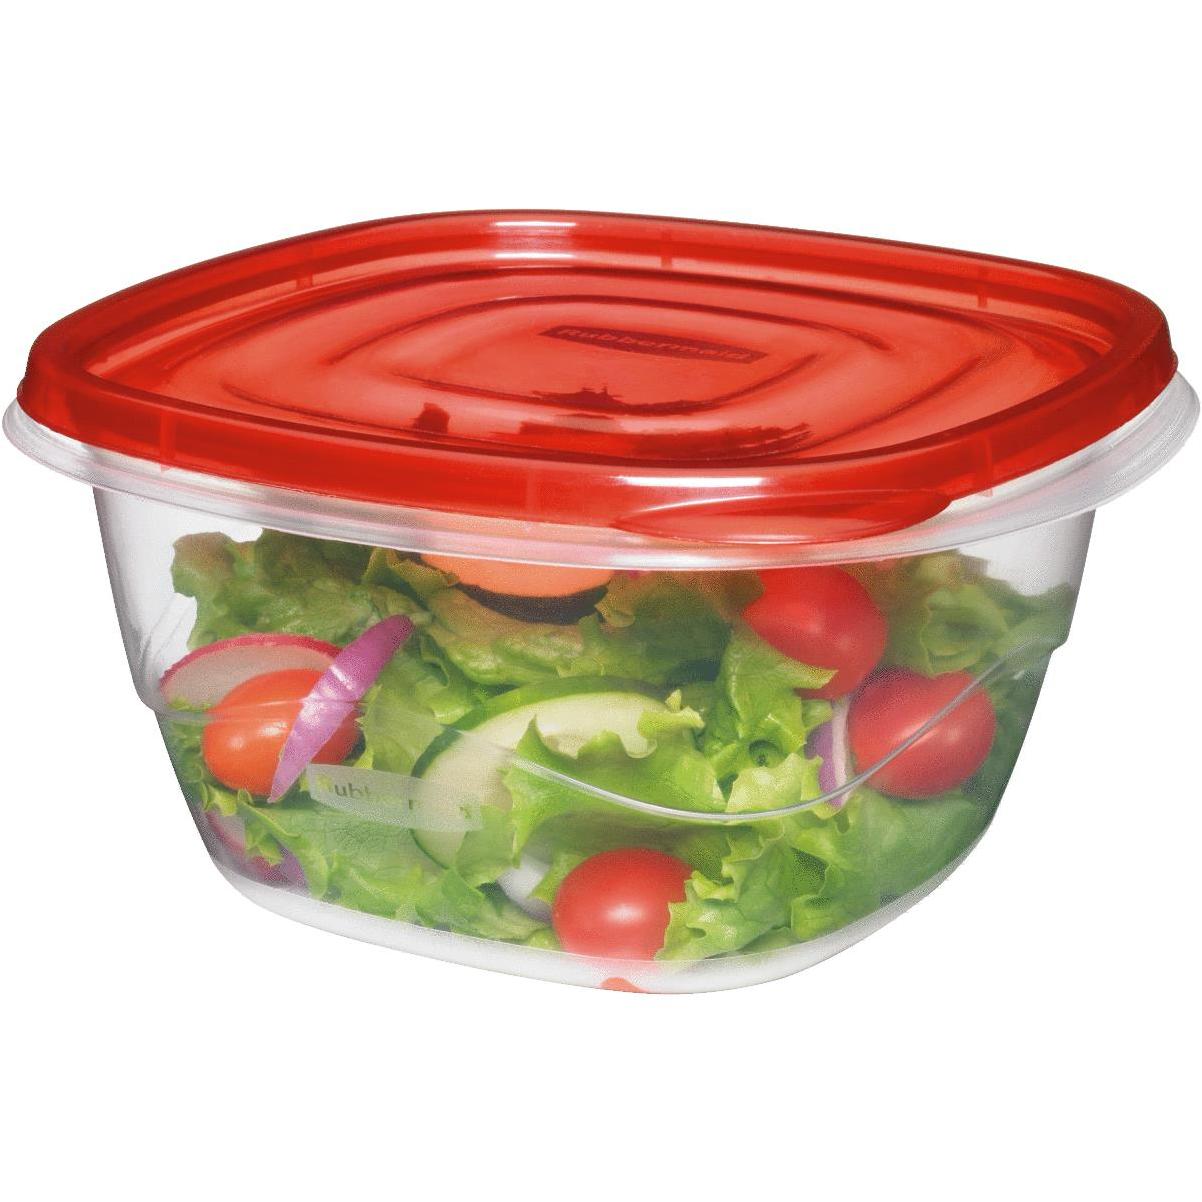 Ziploc 1.5 Pt. Clear Square Food Storage Container with Lids (4-Pack)